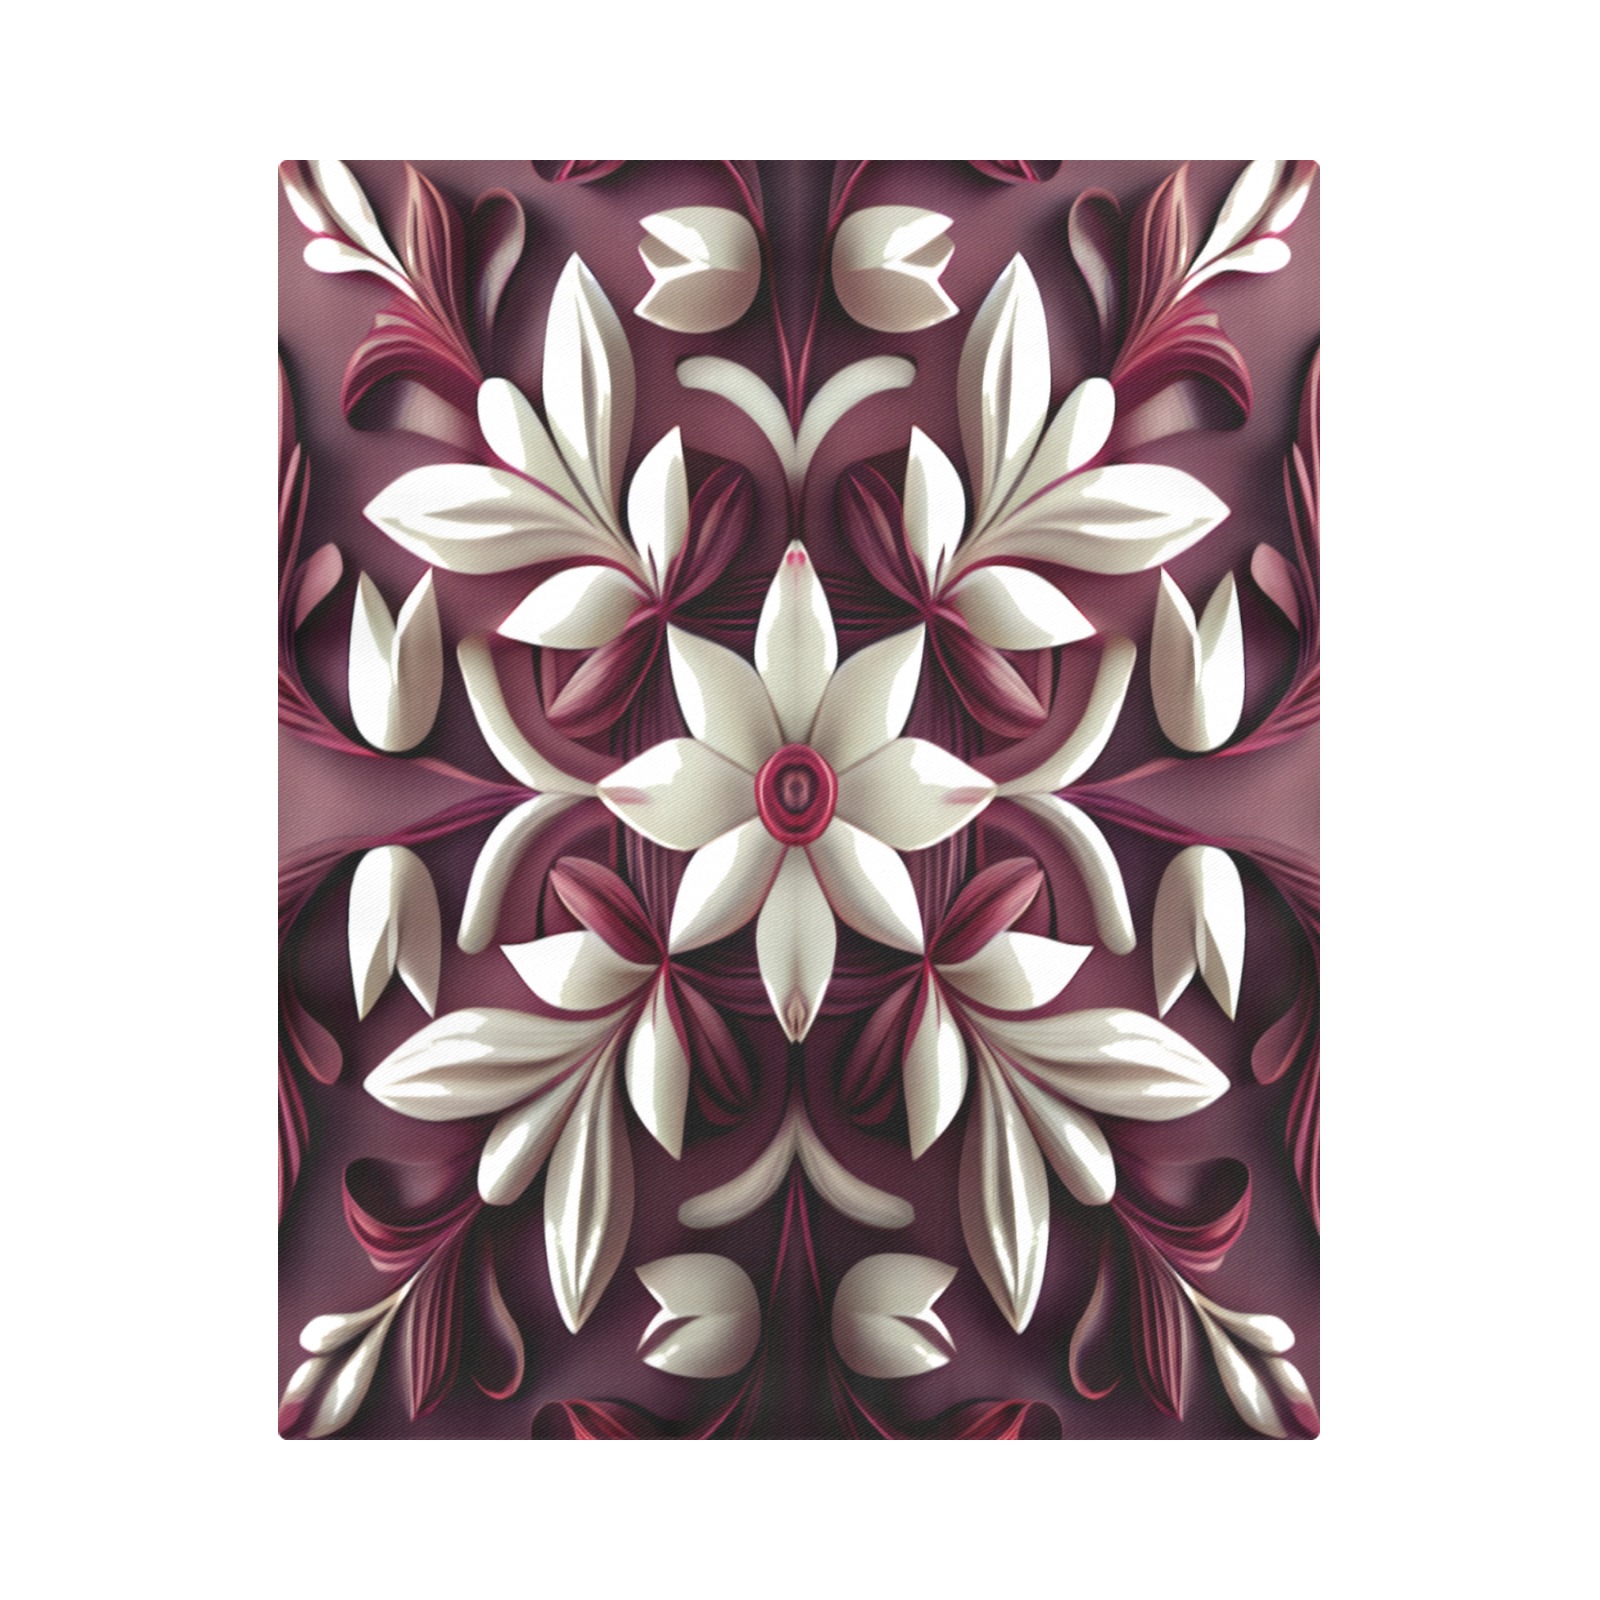 burgundy and white floral pattern Duvet Cover 86"x70" ( All-over-print)